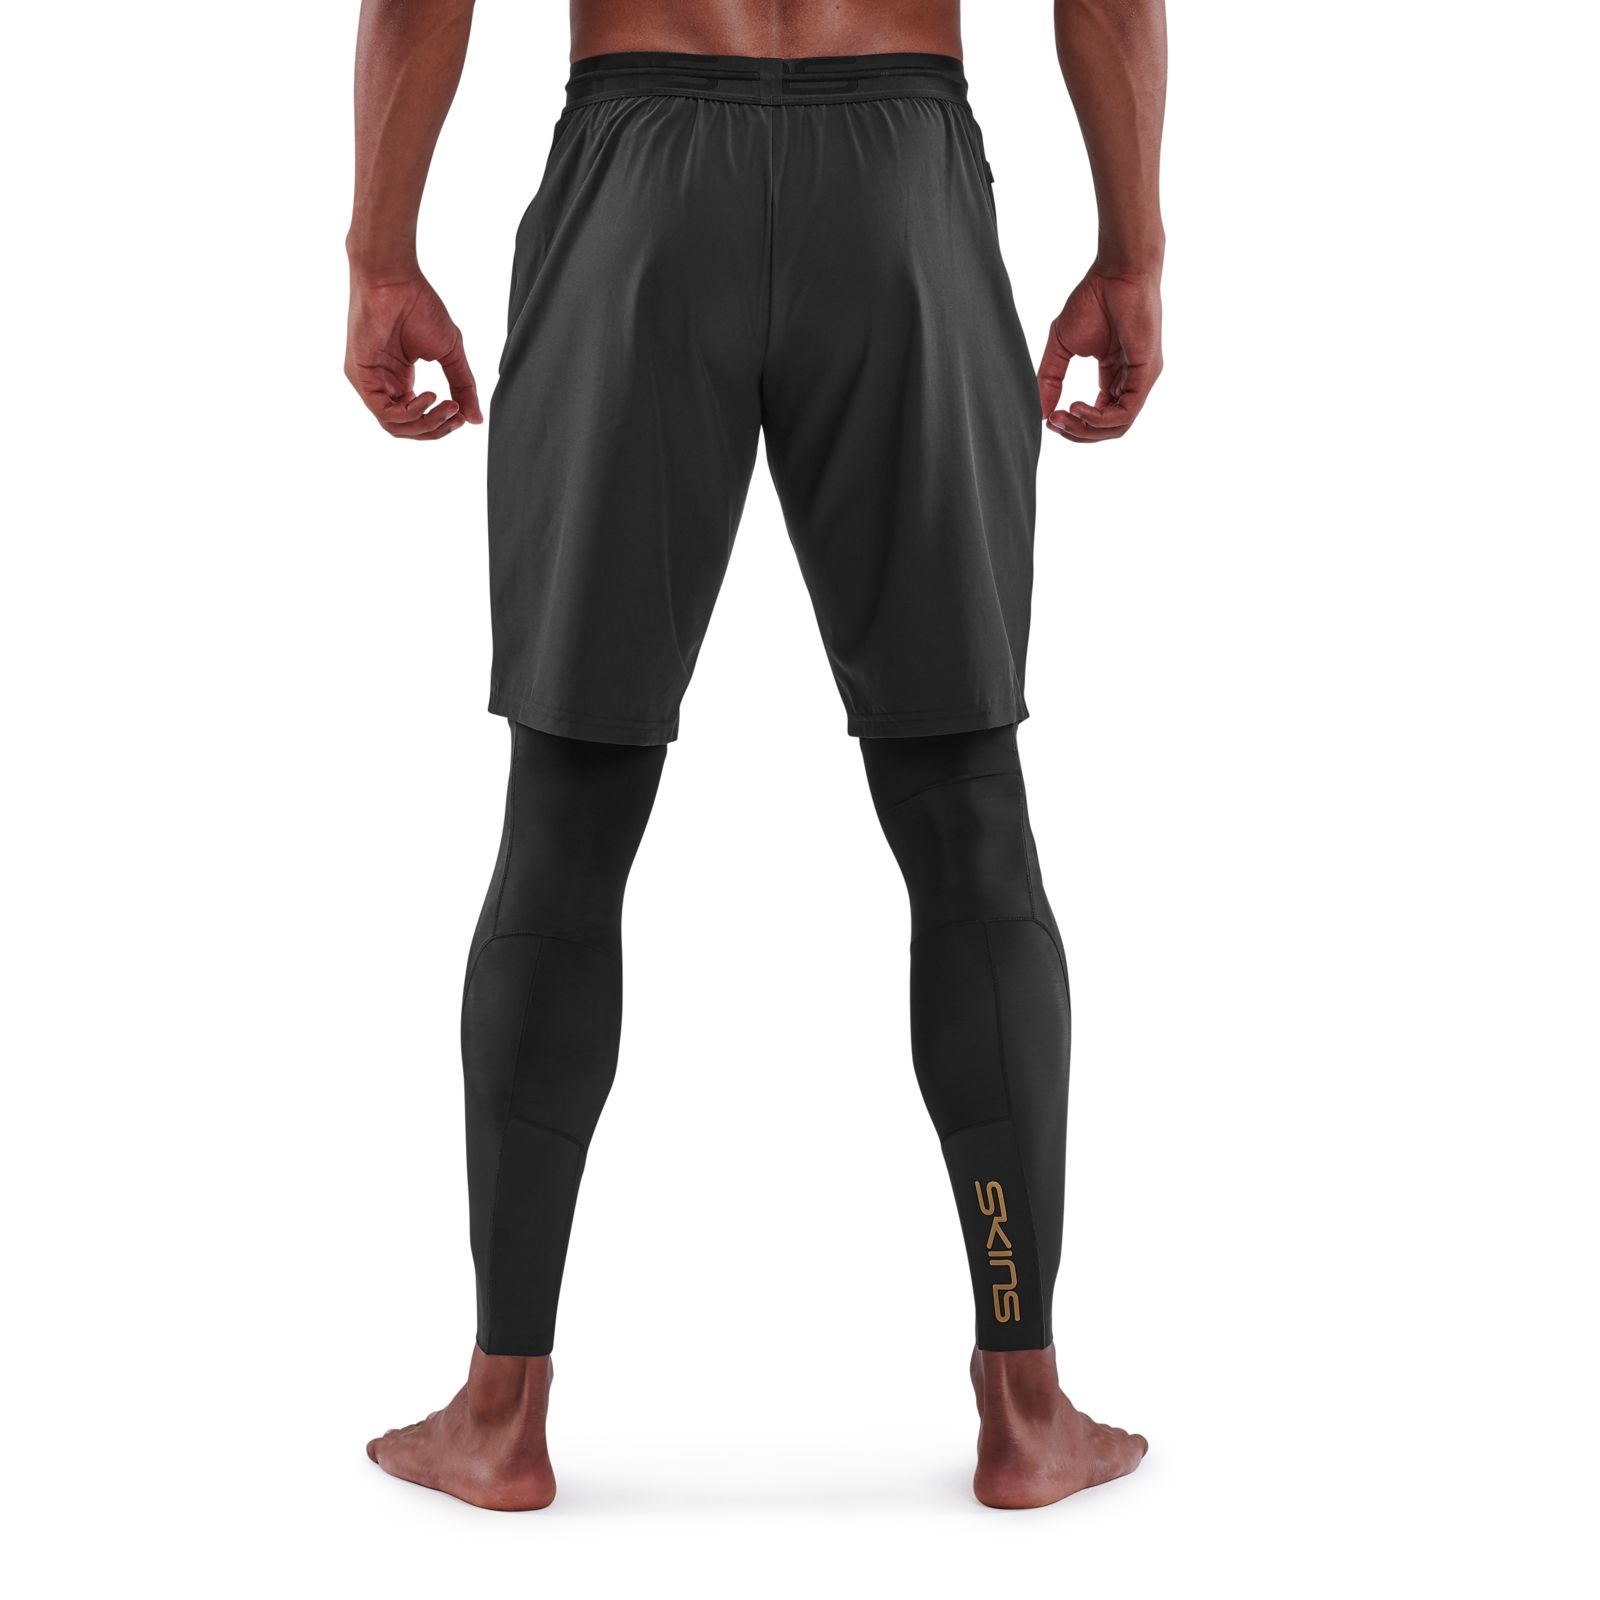 Buy Shifter Compression Shorts Tights for Men Best Multi Sports